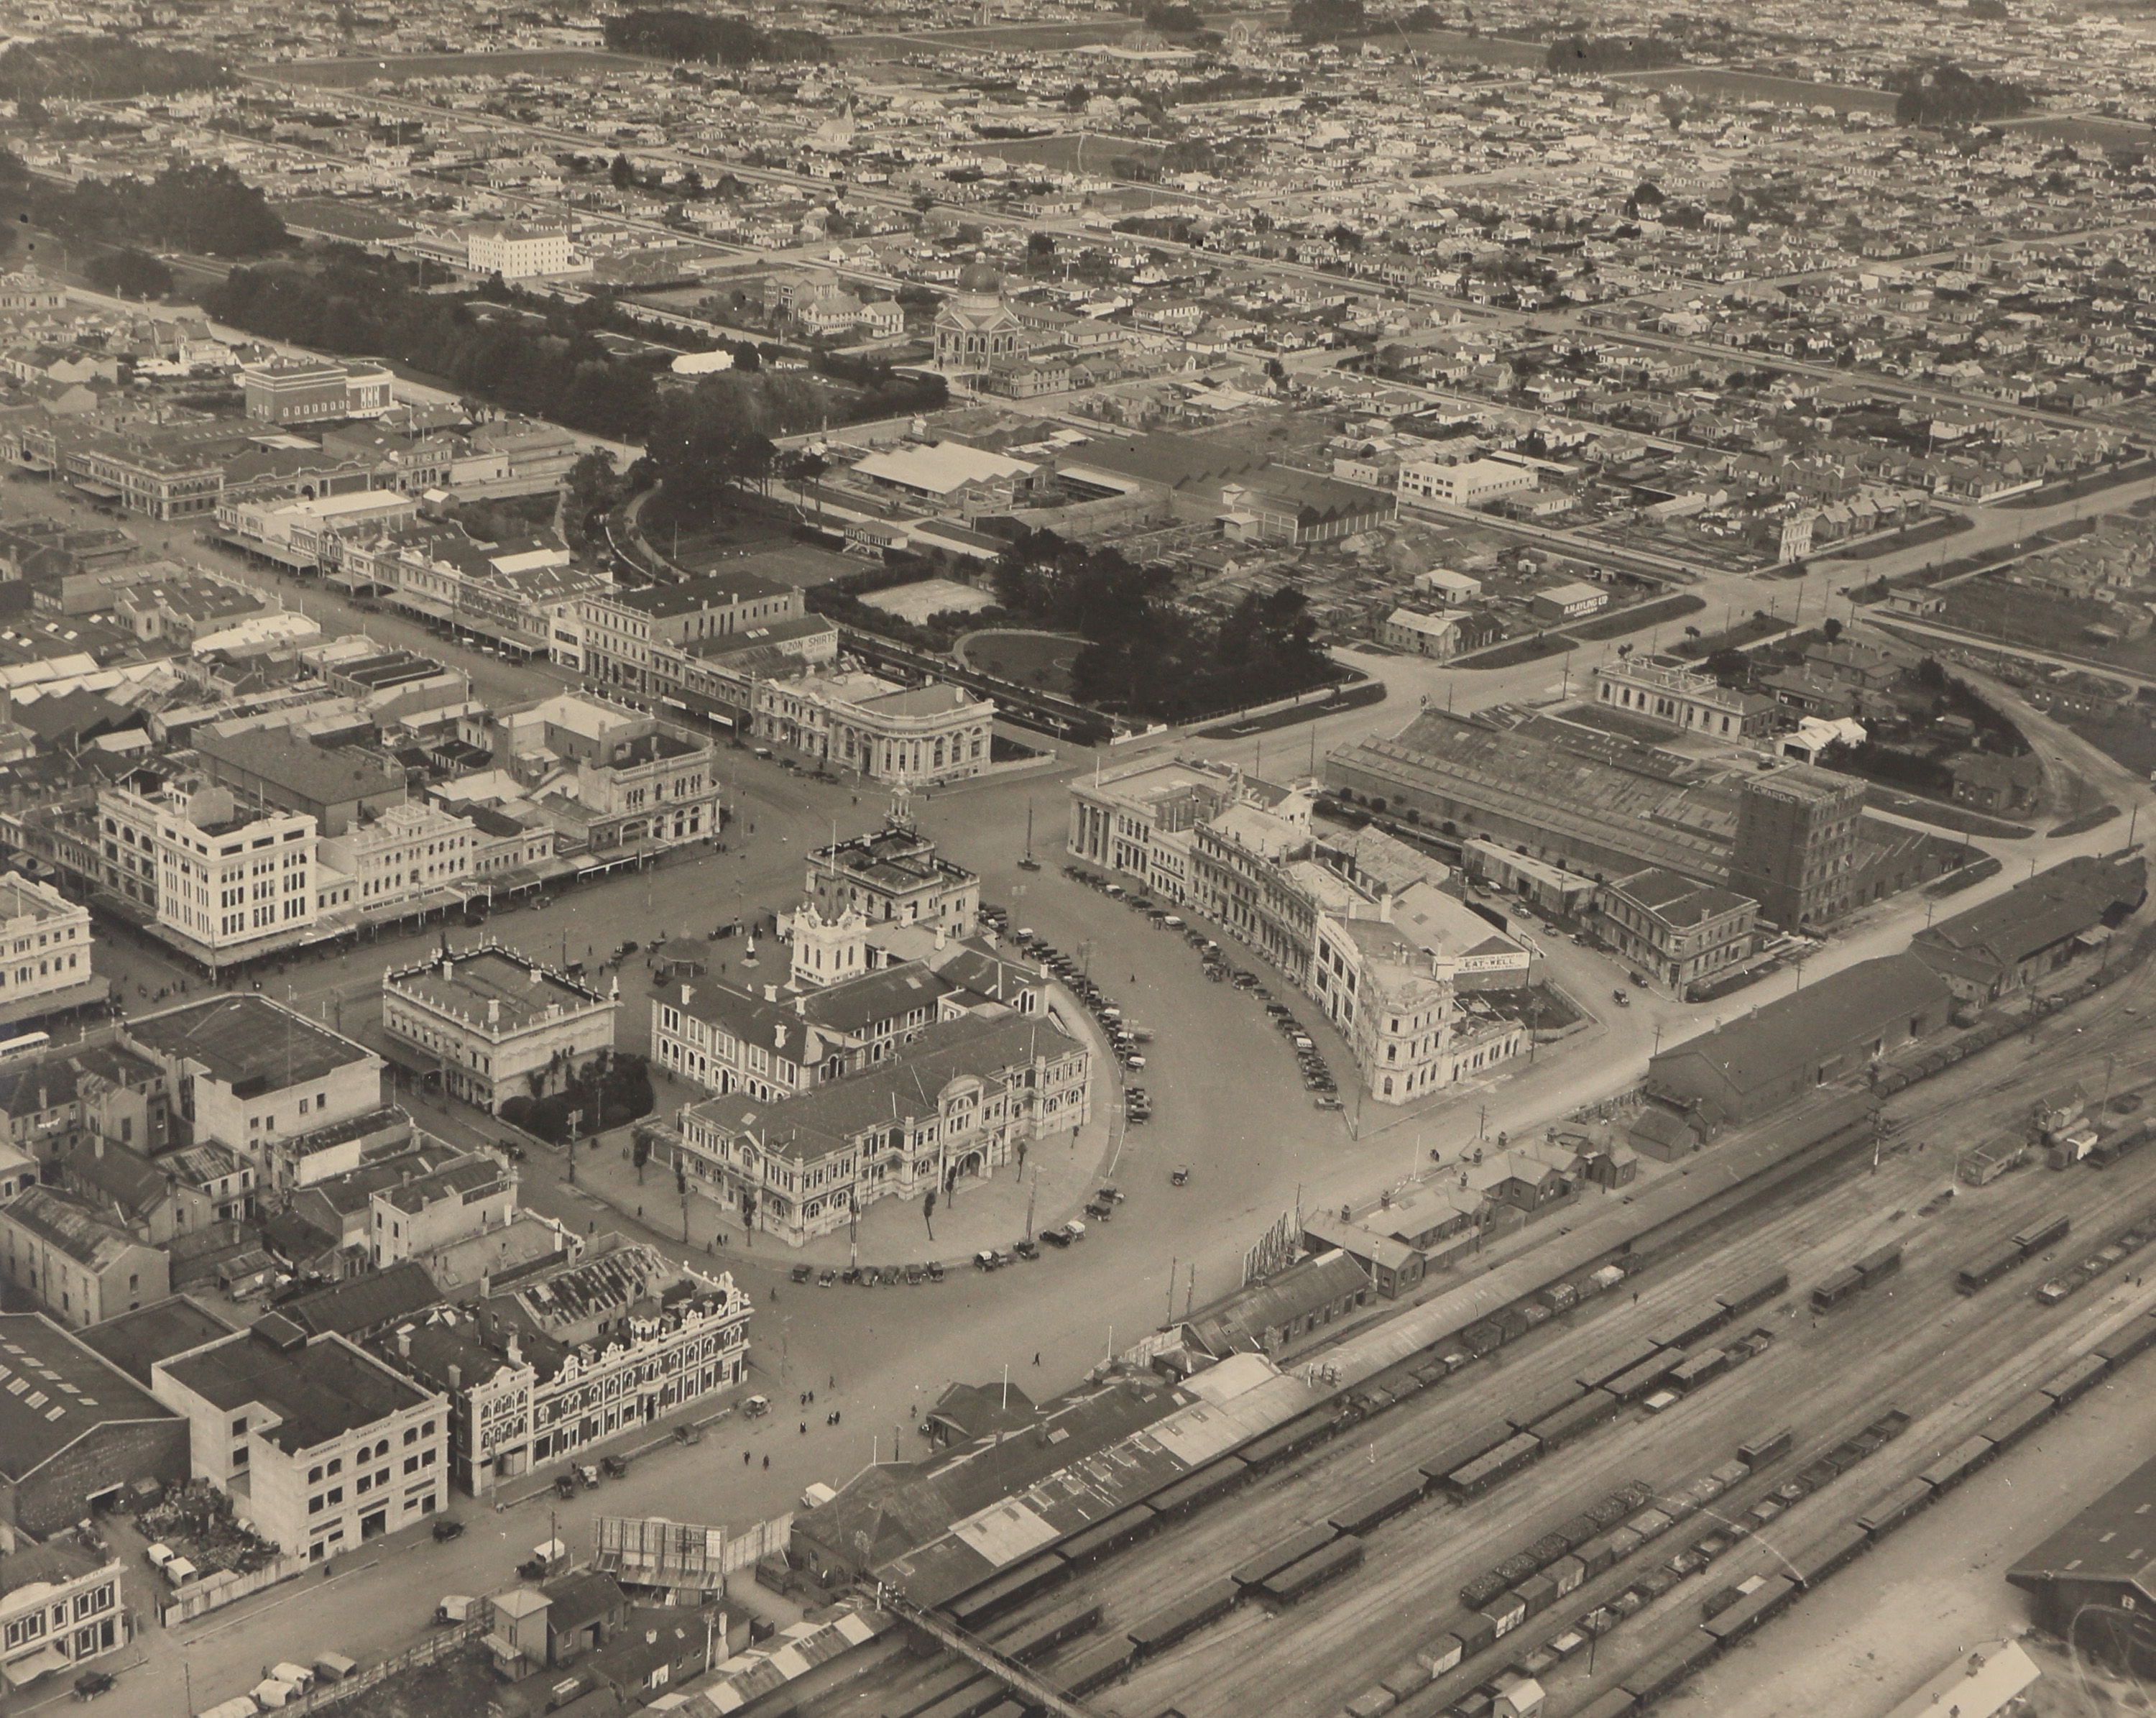 Aerial View of Invercargill, looking south over The Crescent